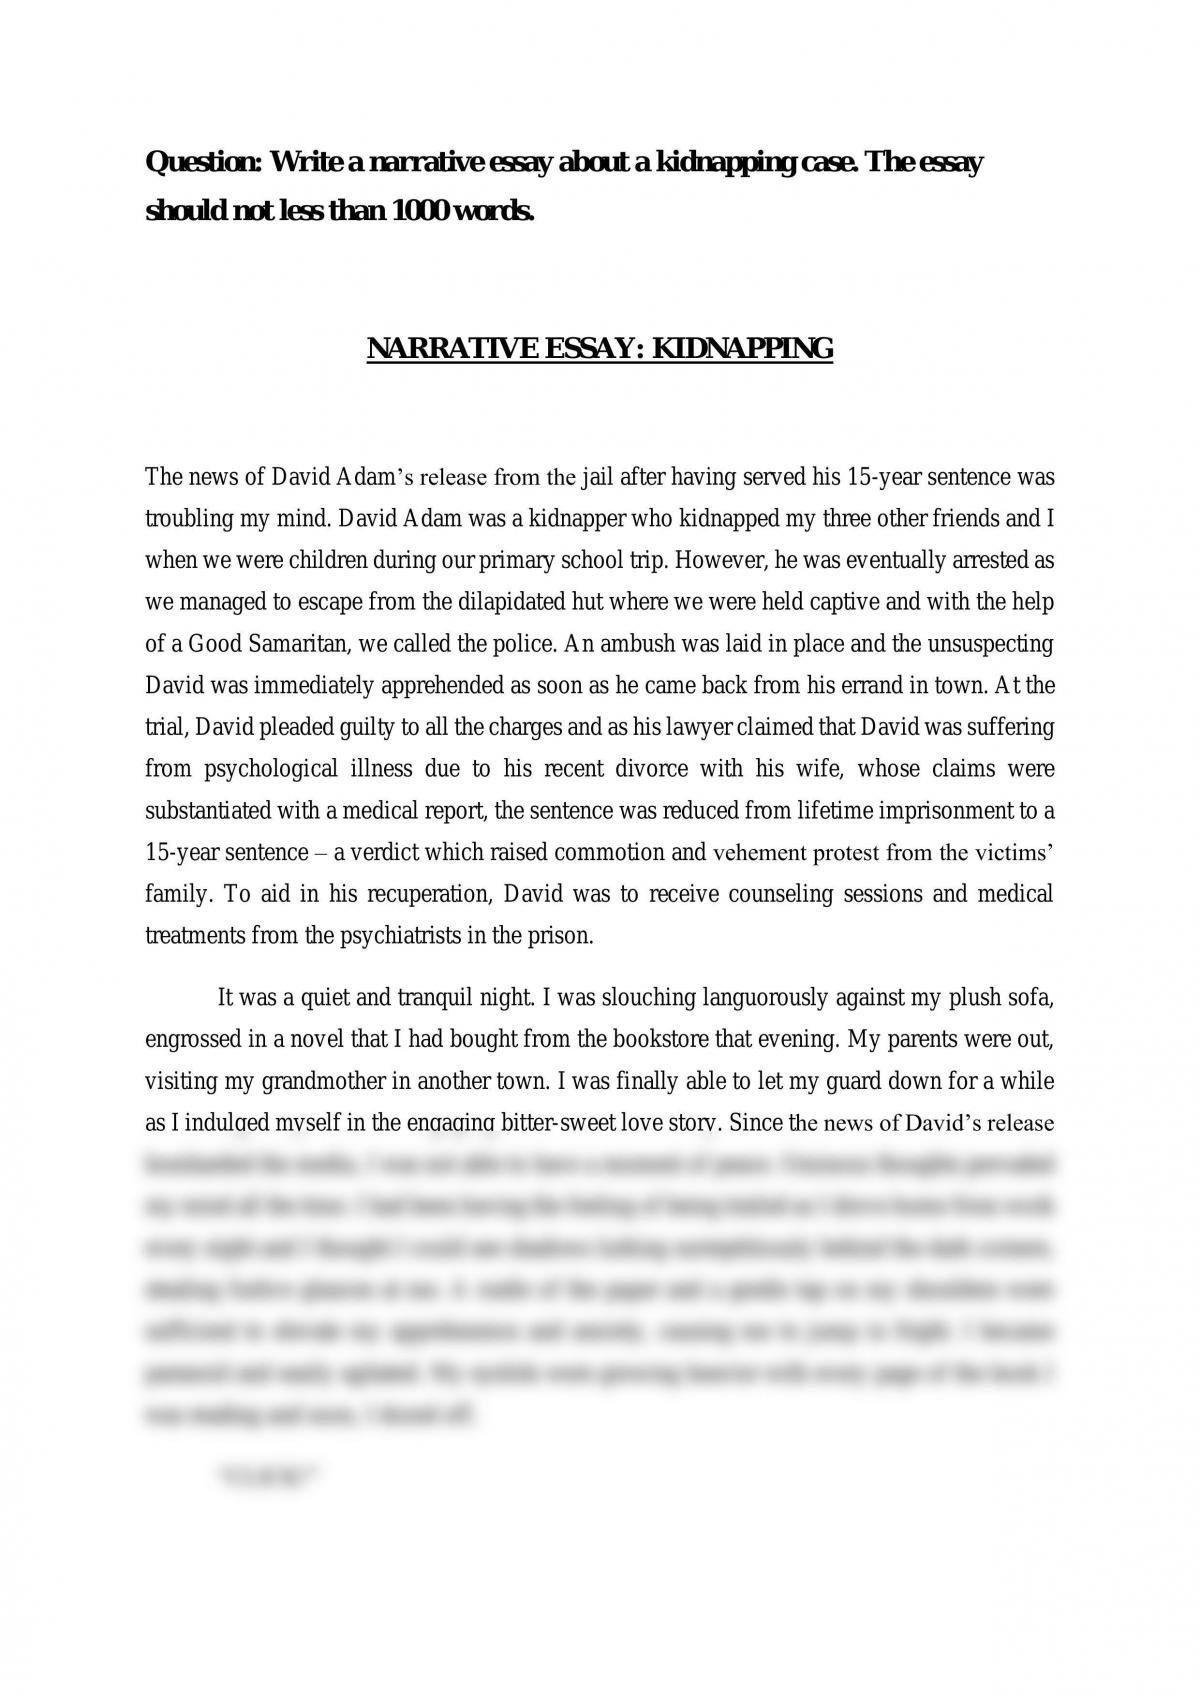 kidnapping meaning essay